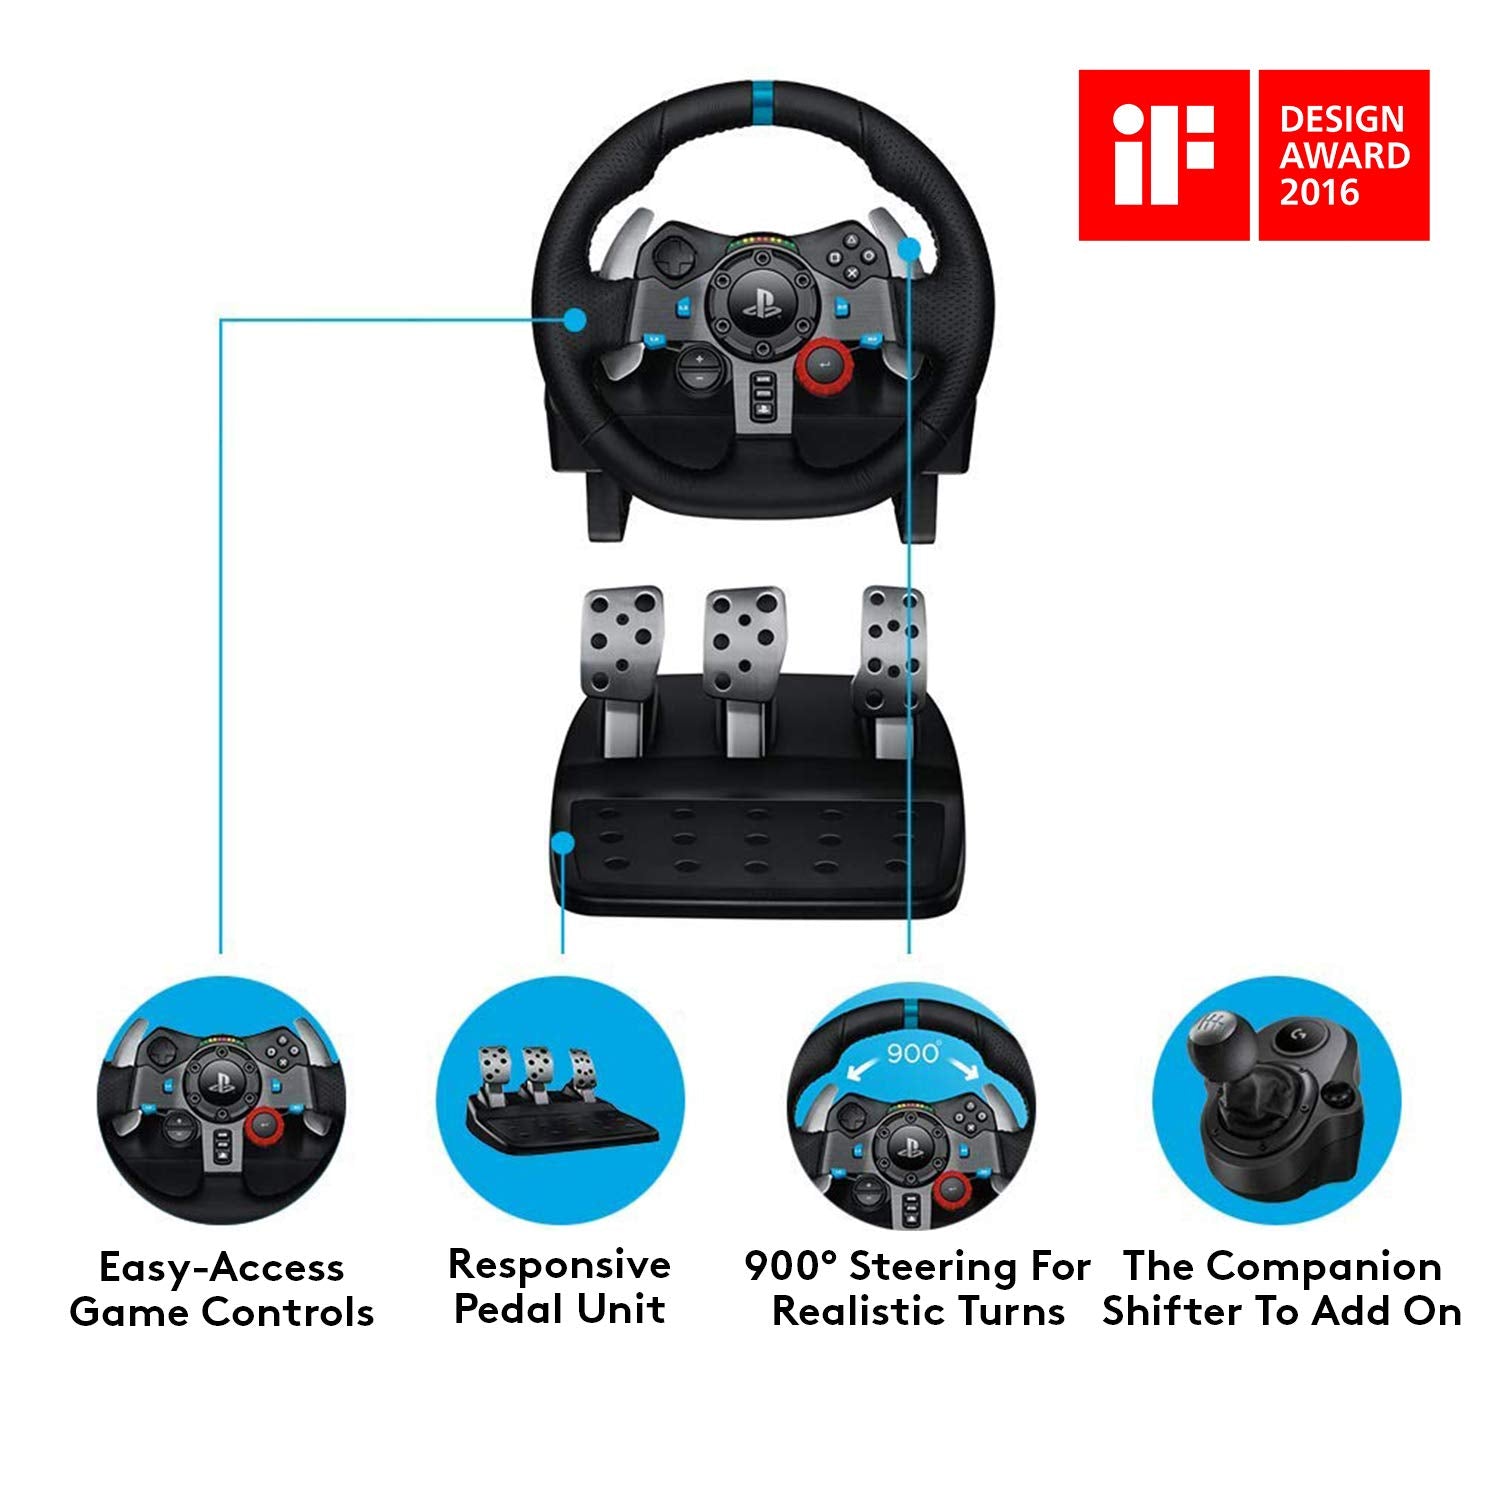  Logitech G29 Driving Force Racing Wheel and Floor Pedals, Real  Force Feedback, Stainless Steel Paddle Shifters, Leather Steering Wheel  Cover, Adjustable Floor Pedals, EU-Plug, PS4/PS3/PC/Mac, Black : Video Games